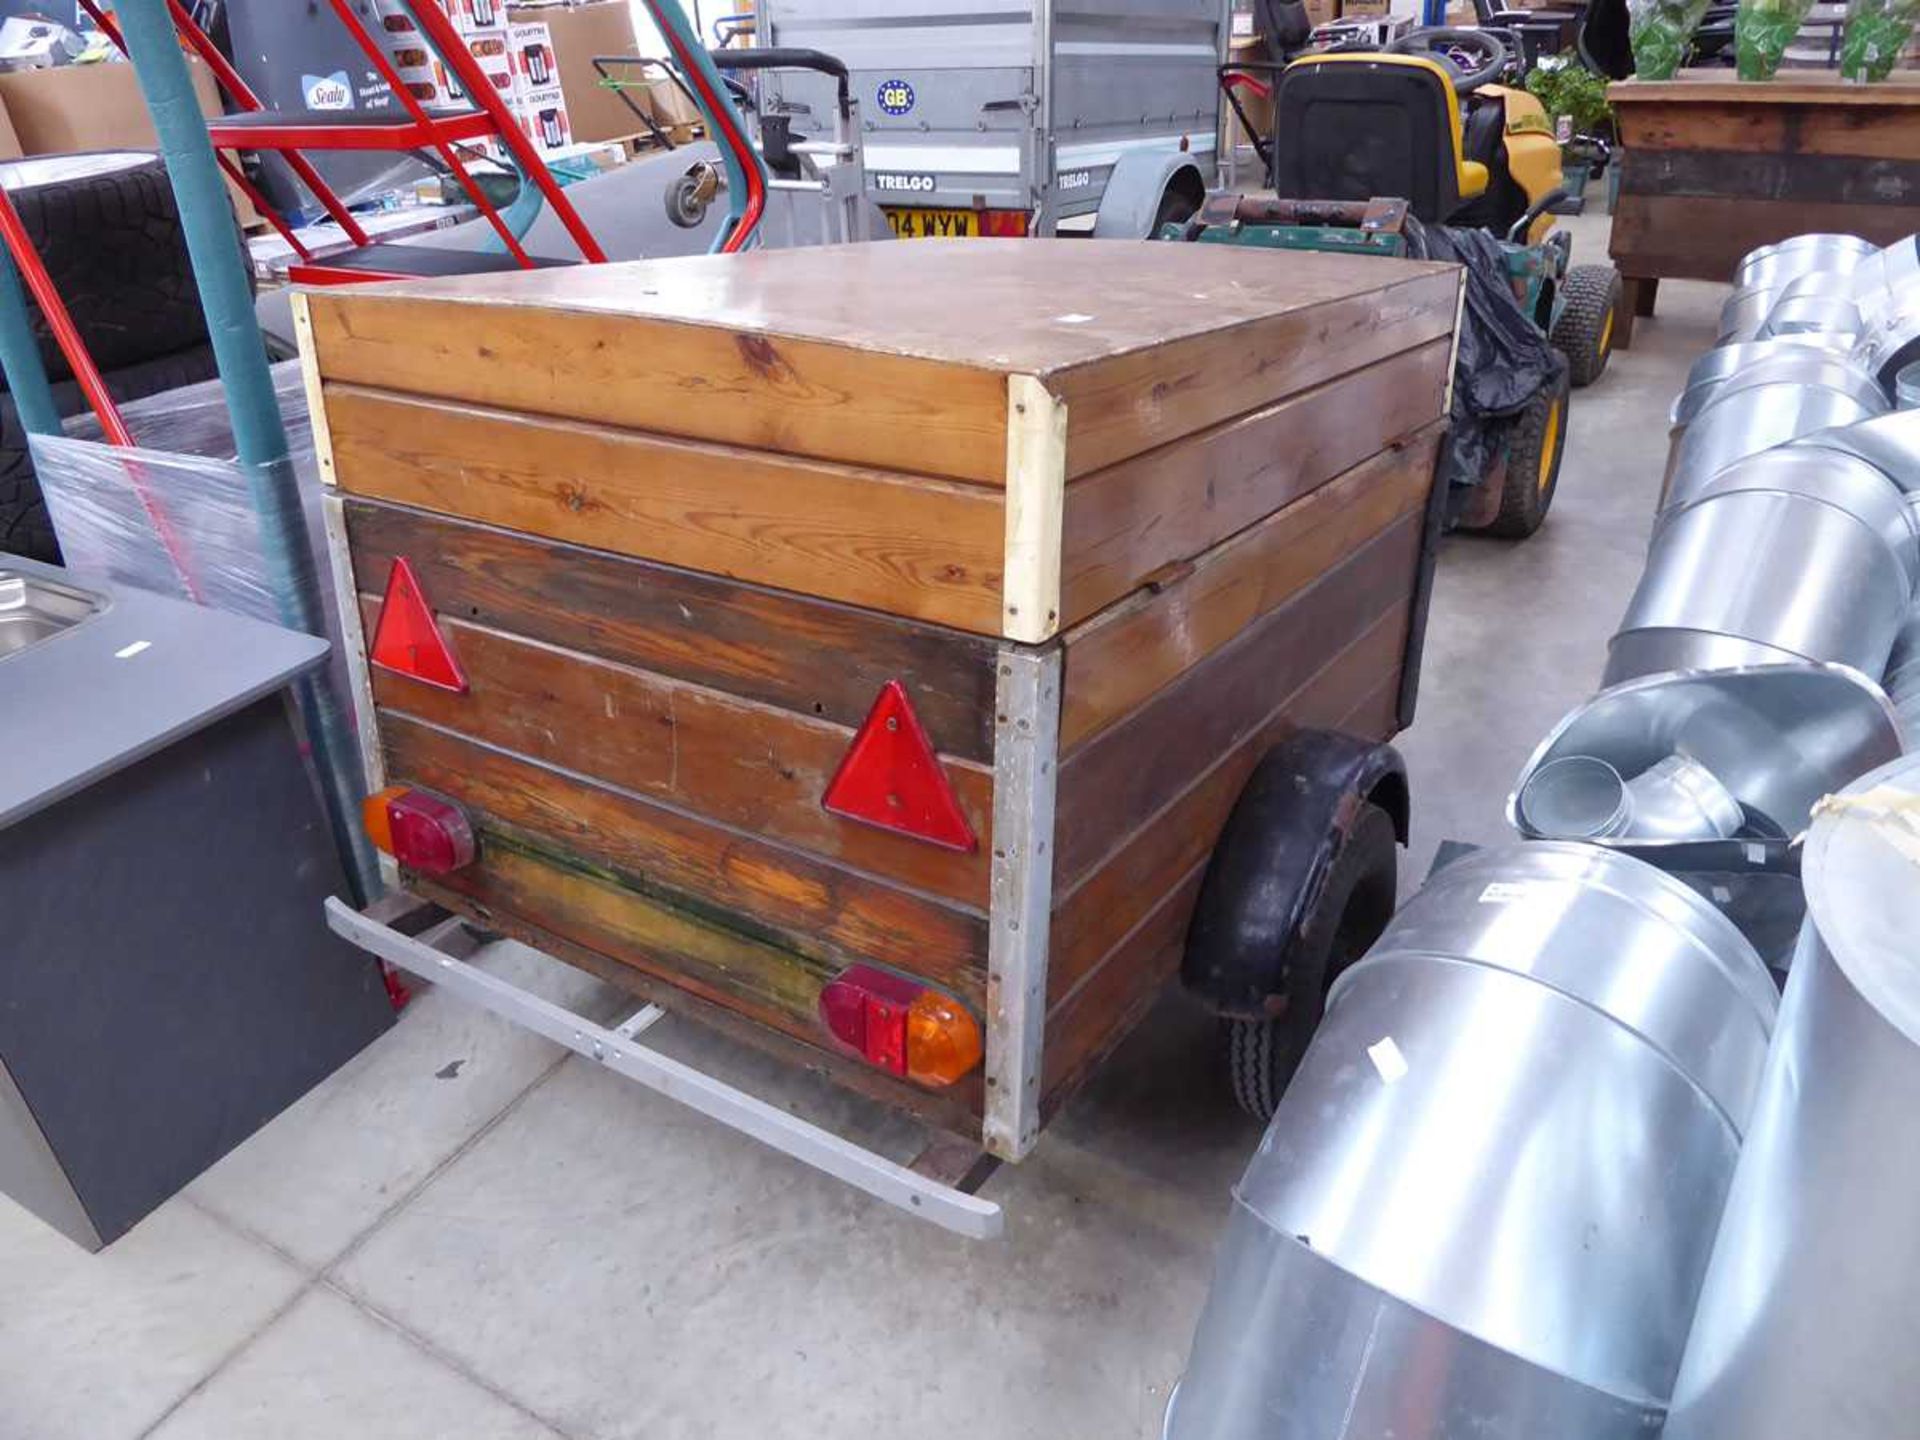 Single axle 2 wheel wooden box canopy trailer with integral lighting - Image 5 of 5